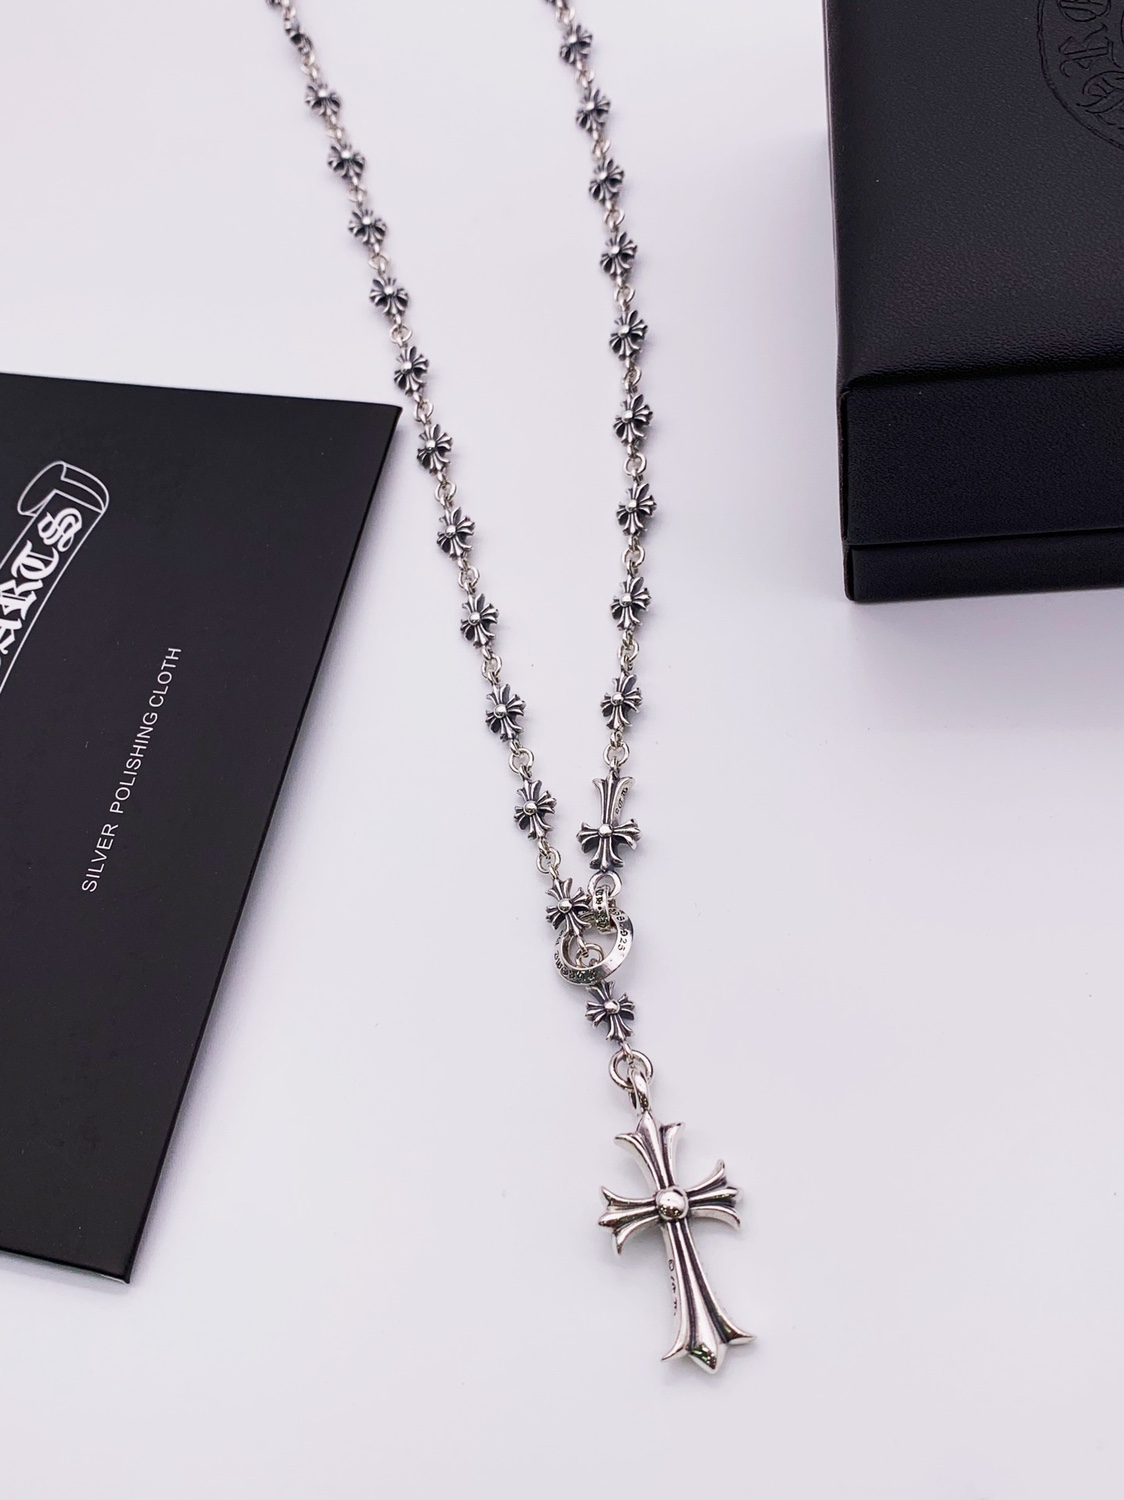 Chrome Hearts Jewelry Necklaces & Pendants Rose 925 Silver Winter Collection